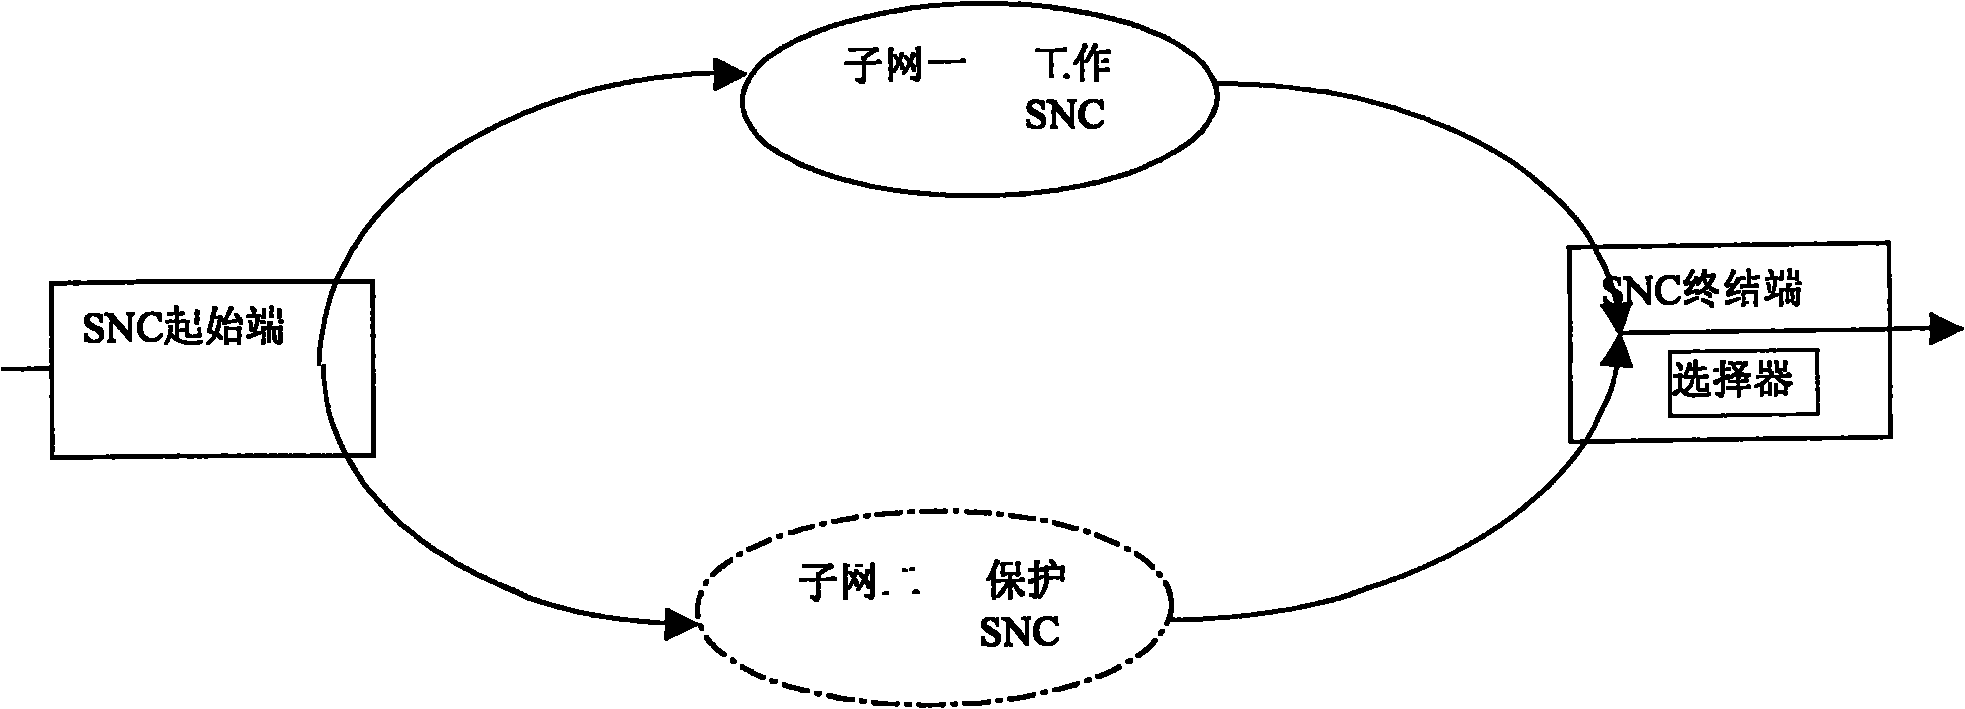 Method for modifying SNCP path